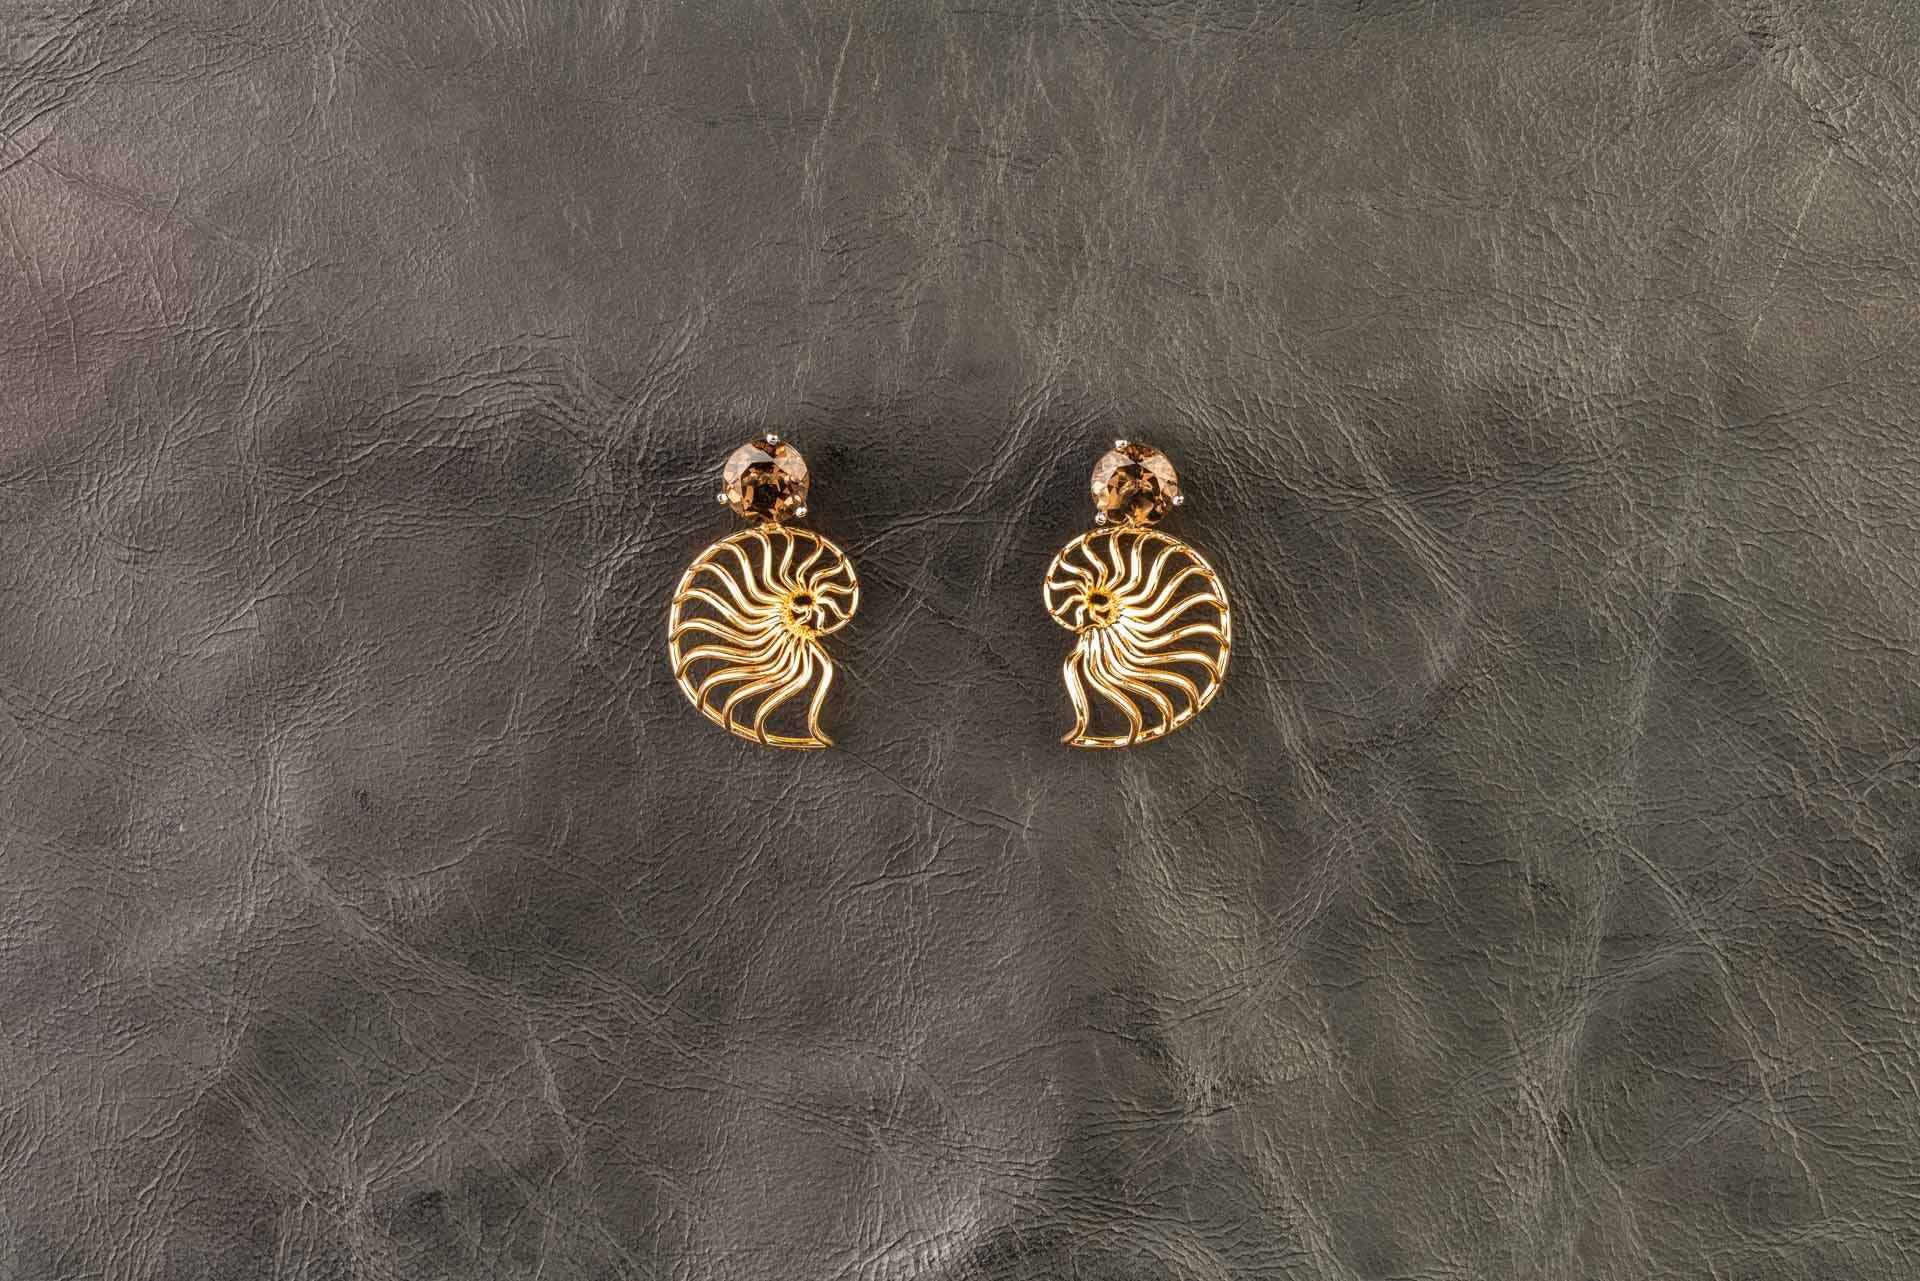 A pair of 18k rose gold three dimensional ammonite earring jackets, on a pair of 18k white gold martini head studs set with 8mm round smoky quartz. These earrings were made and designed by llyn strong.
Items can be priced separately upon request.